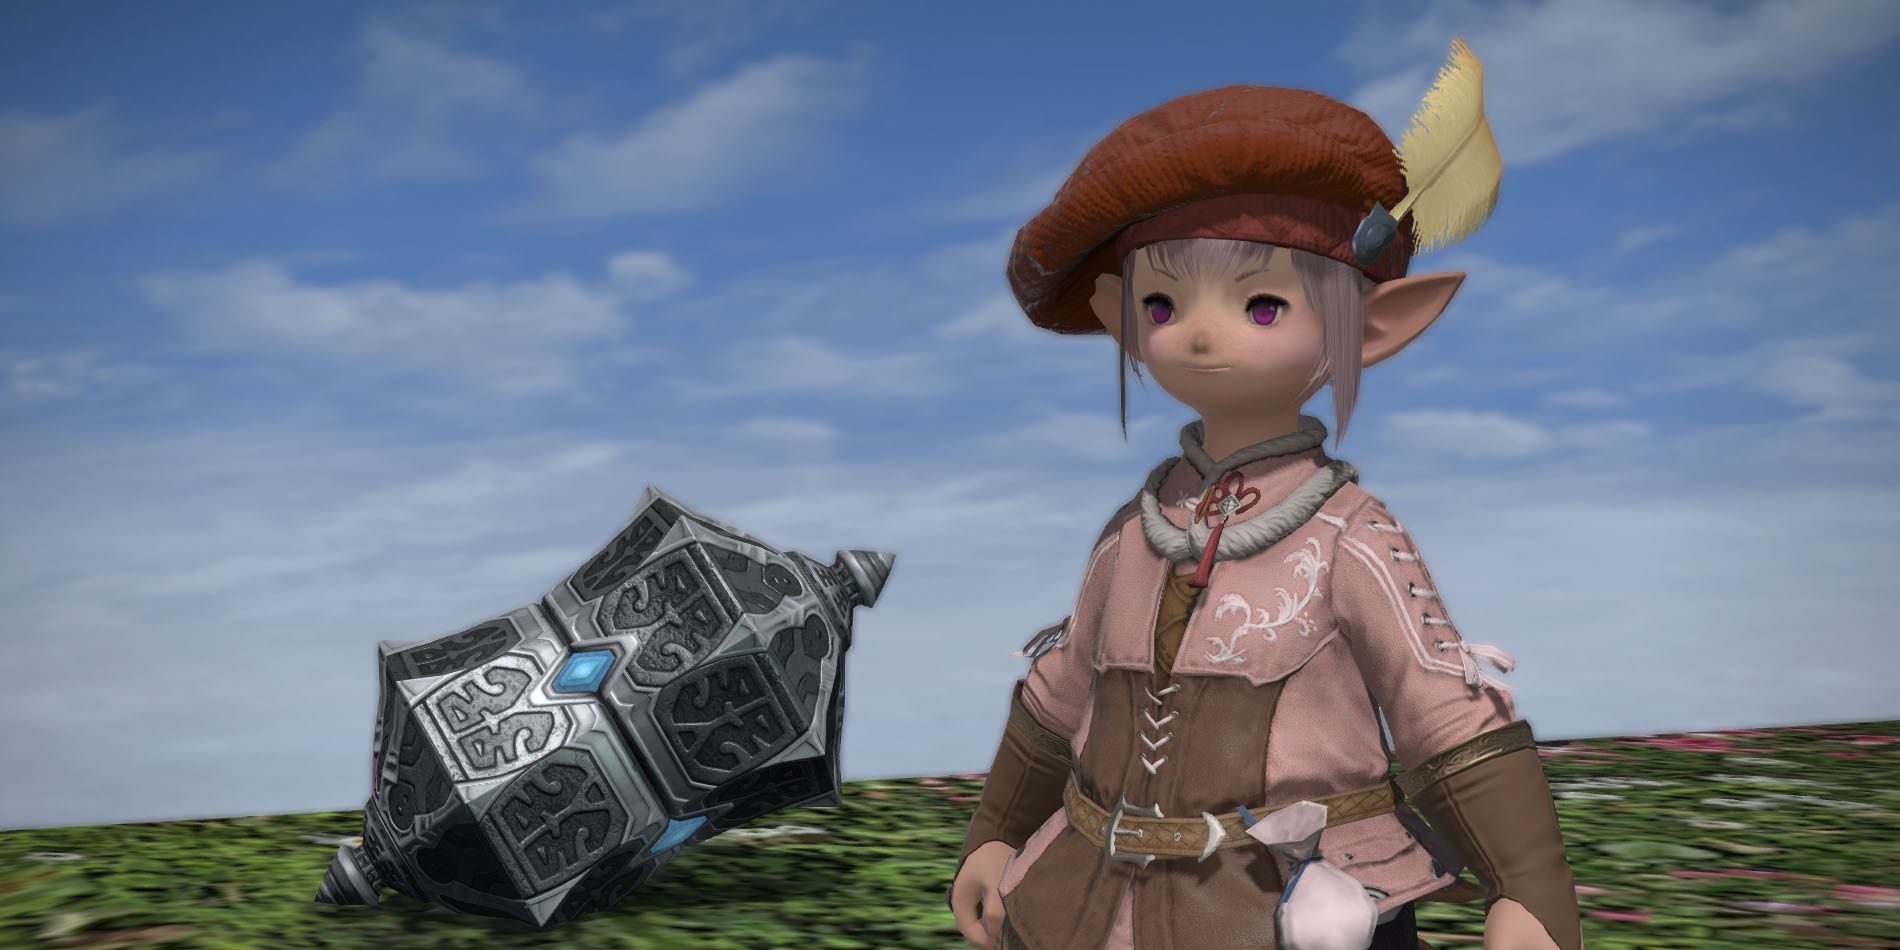 The Redbills leave a gift for Tataru in Final Fantasy 14